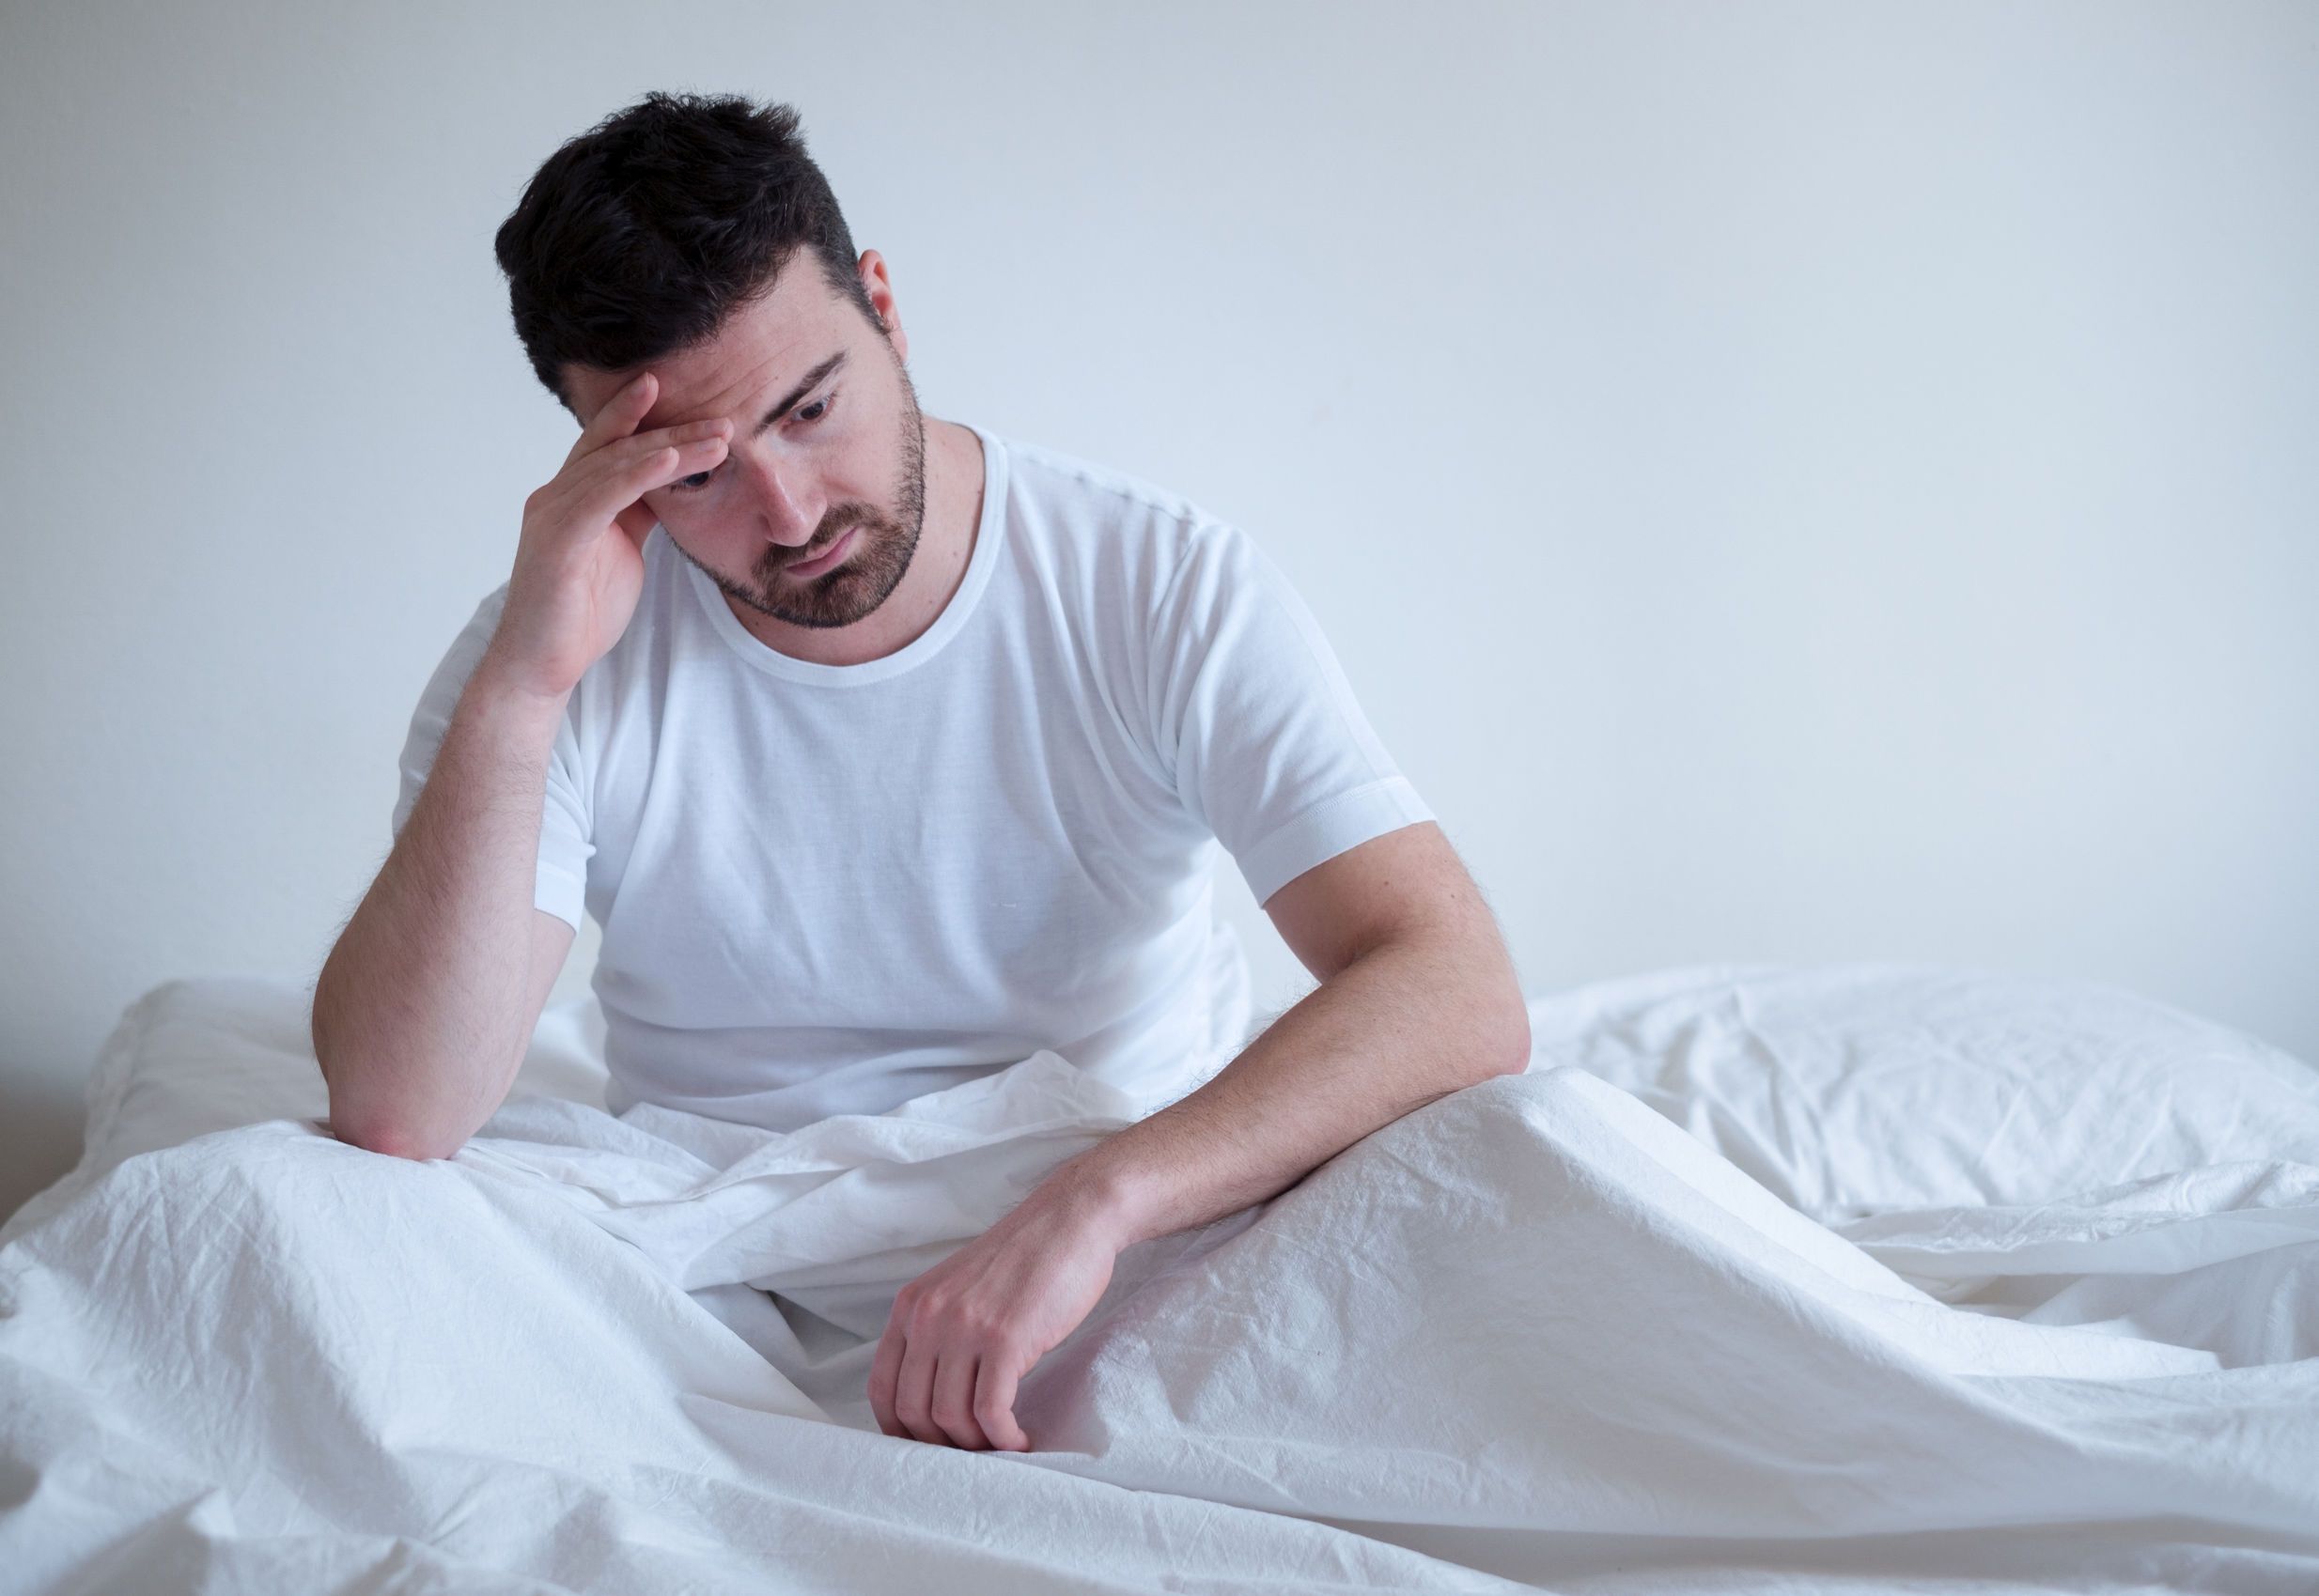 Self-Help Tips for Sleeping Problems and Disorders